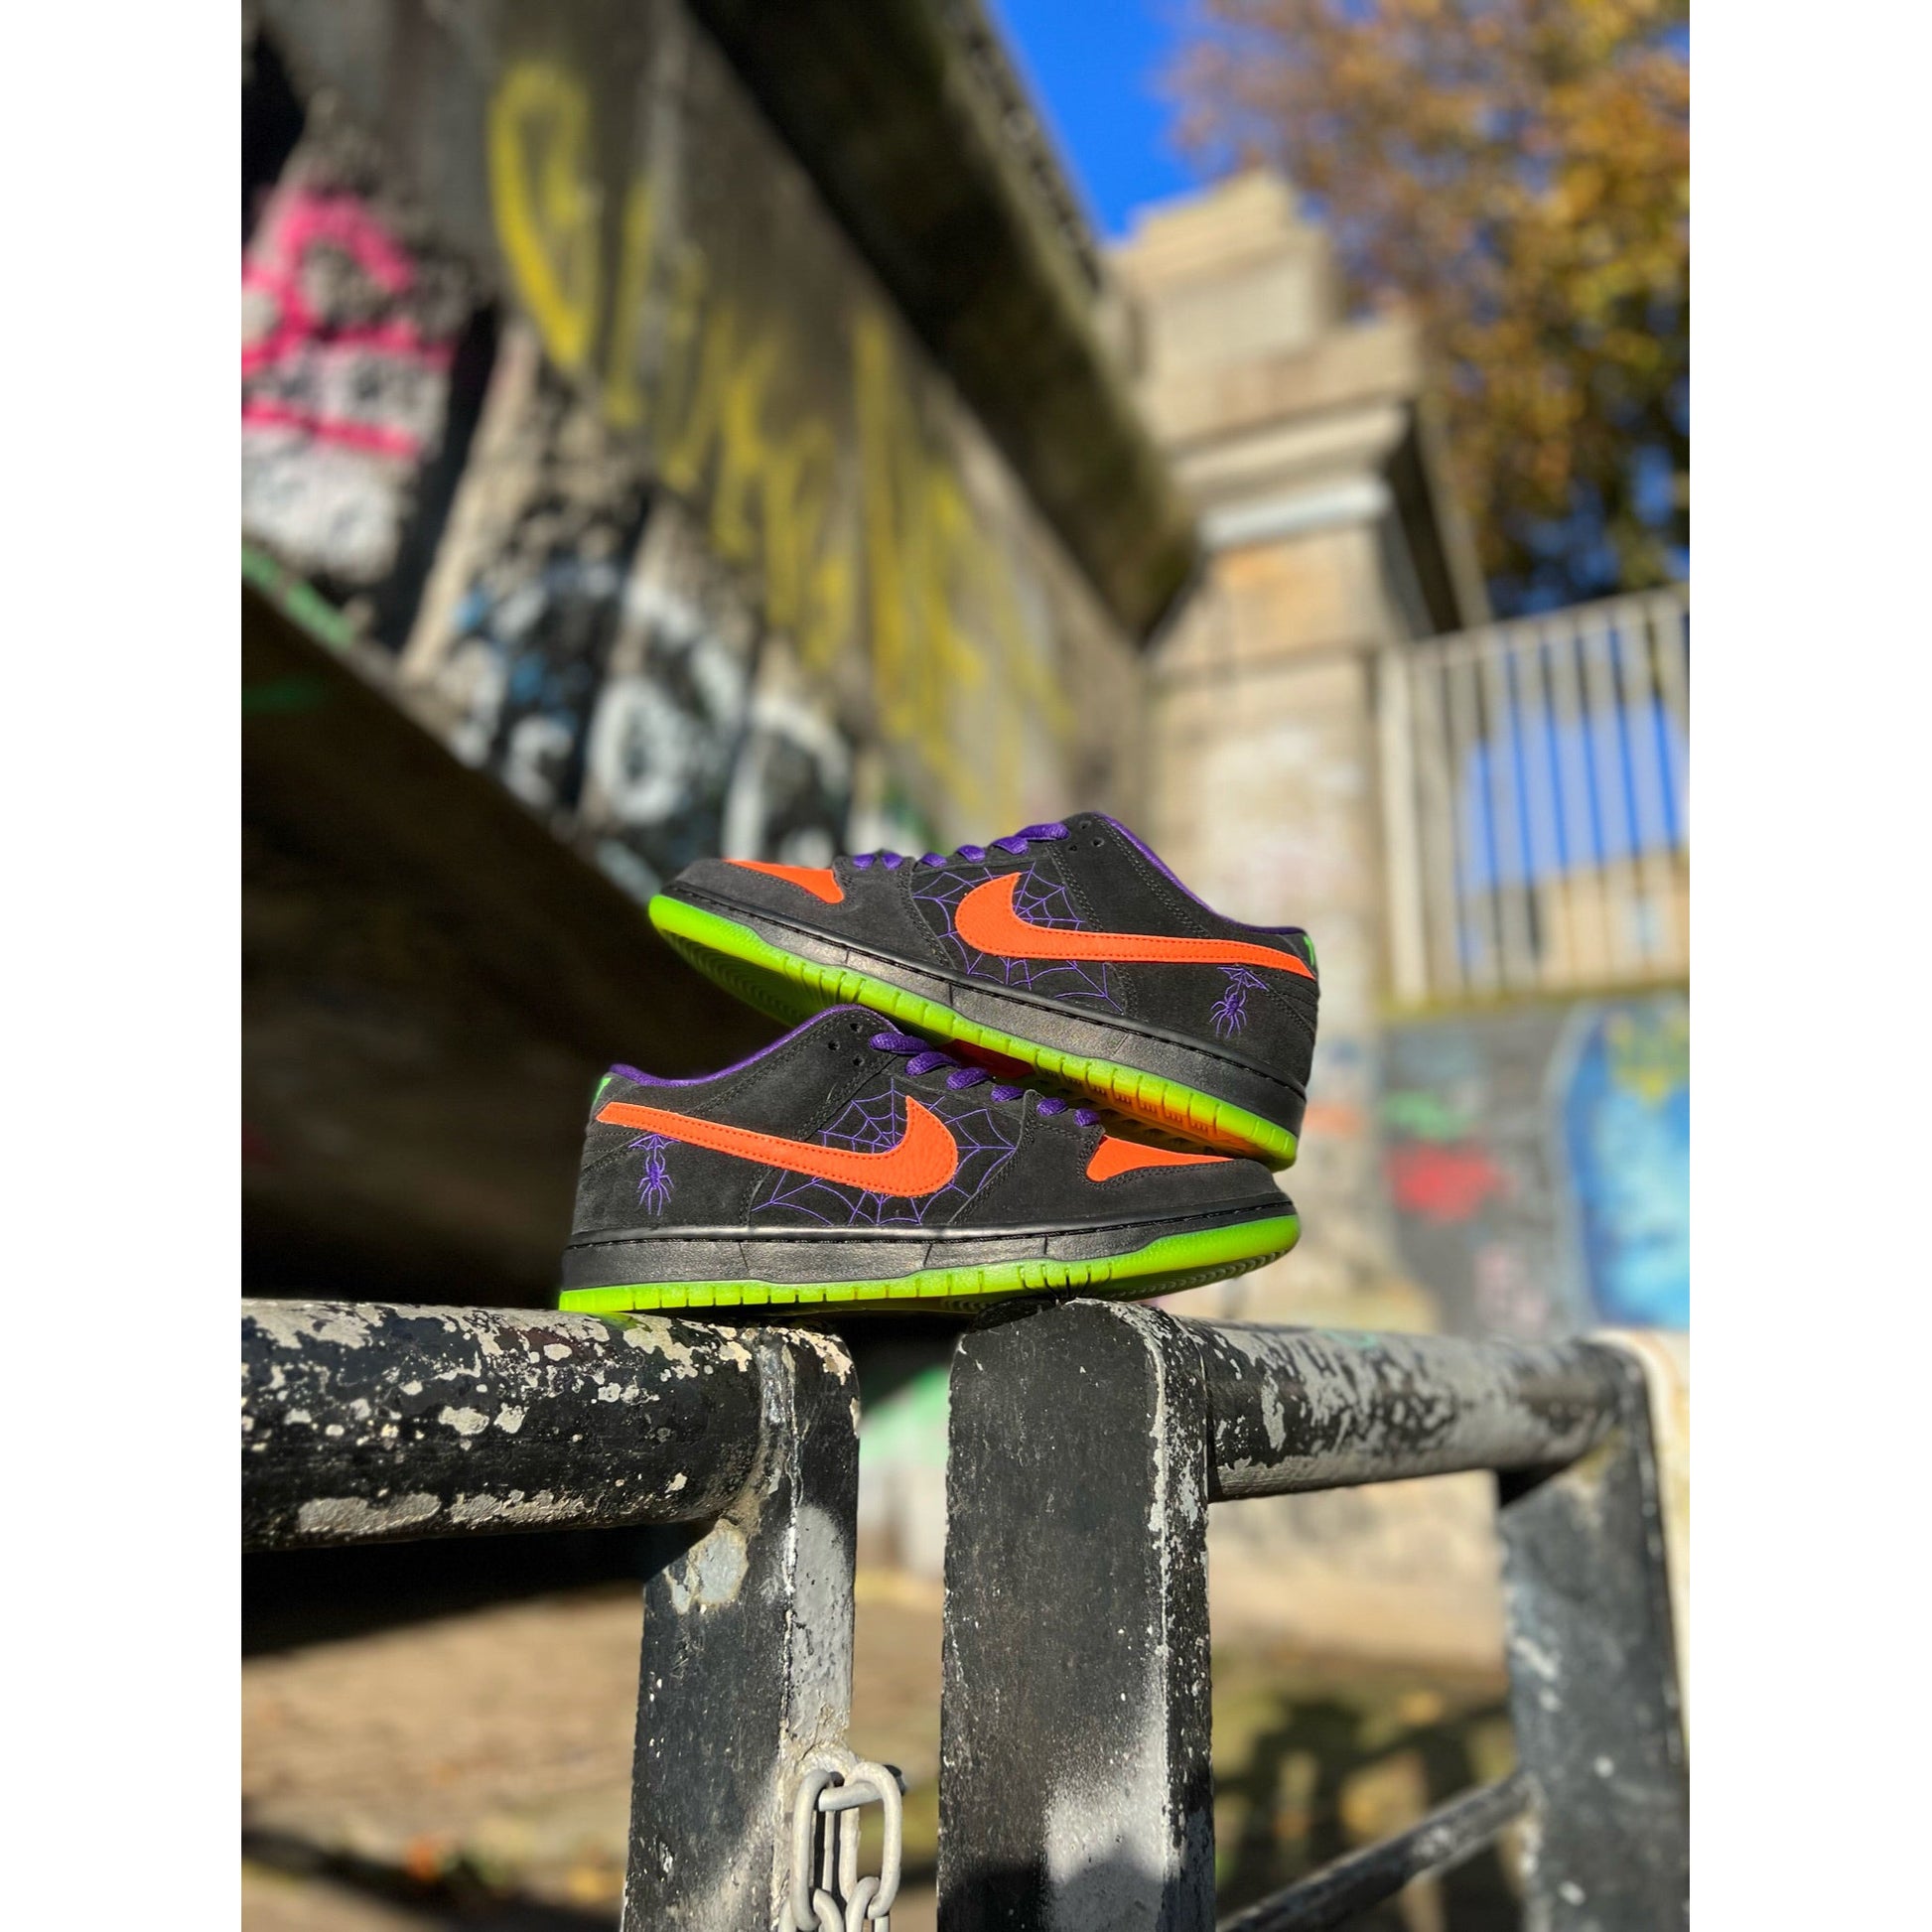 Nike SB Dunk Low Night Of Mischief from Nike